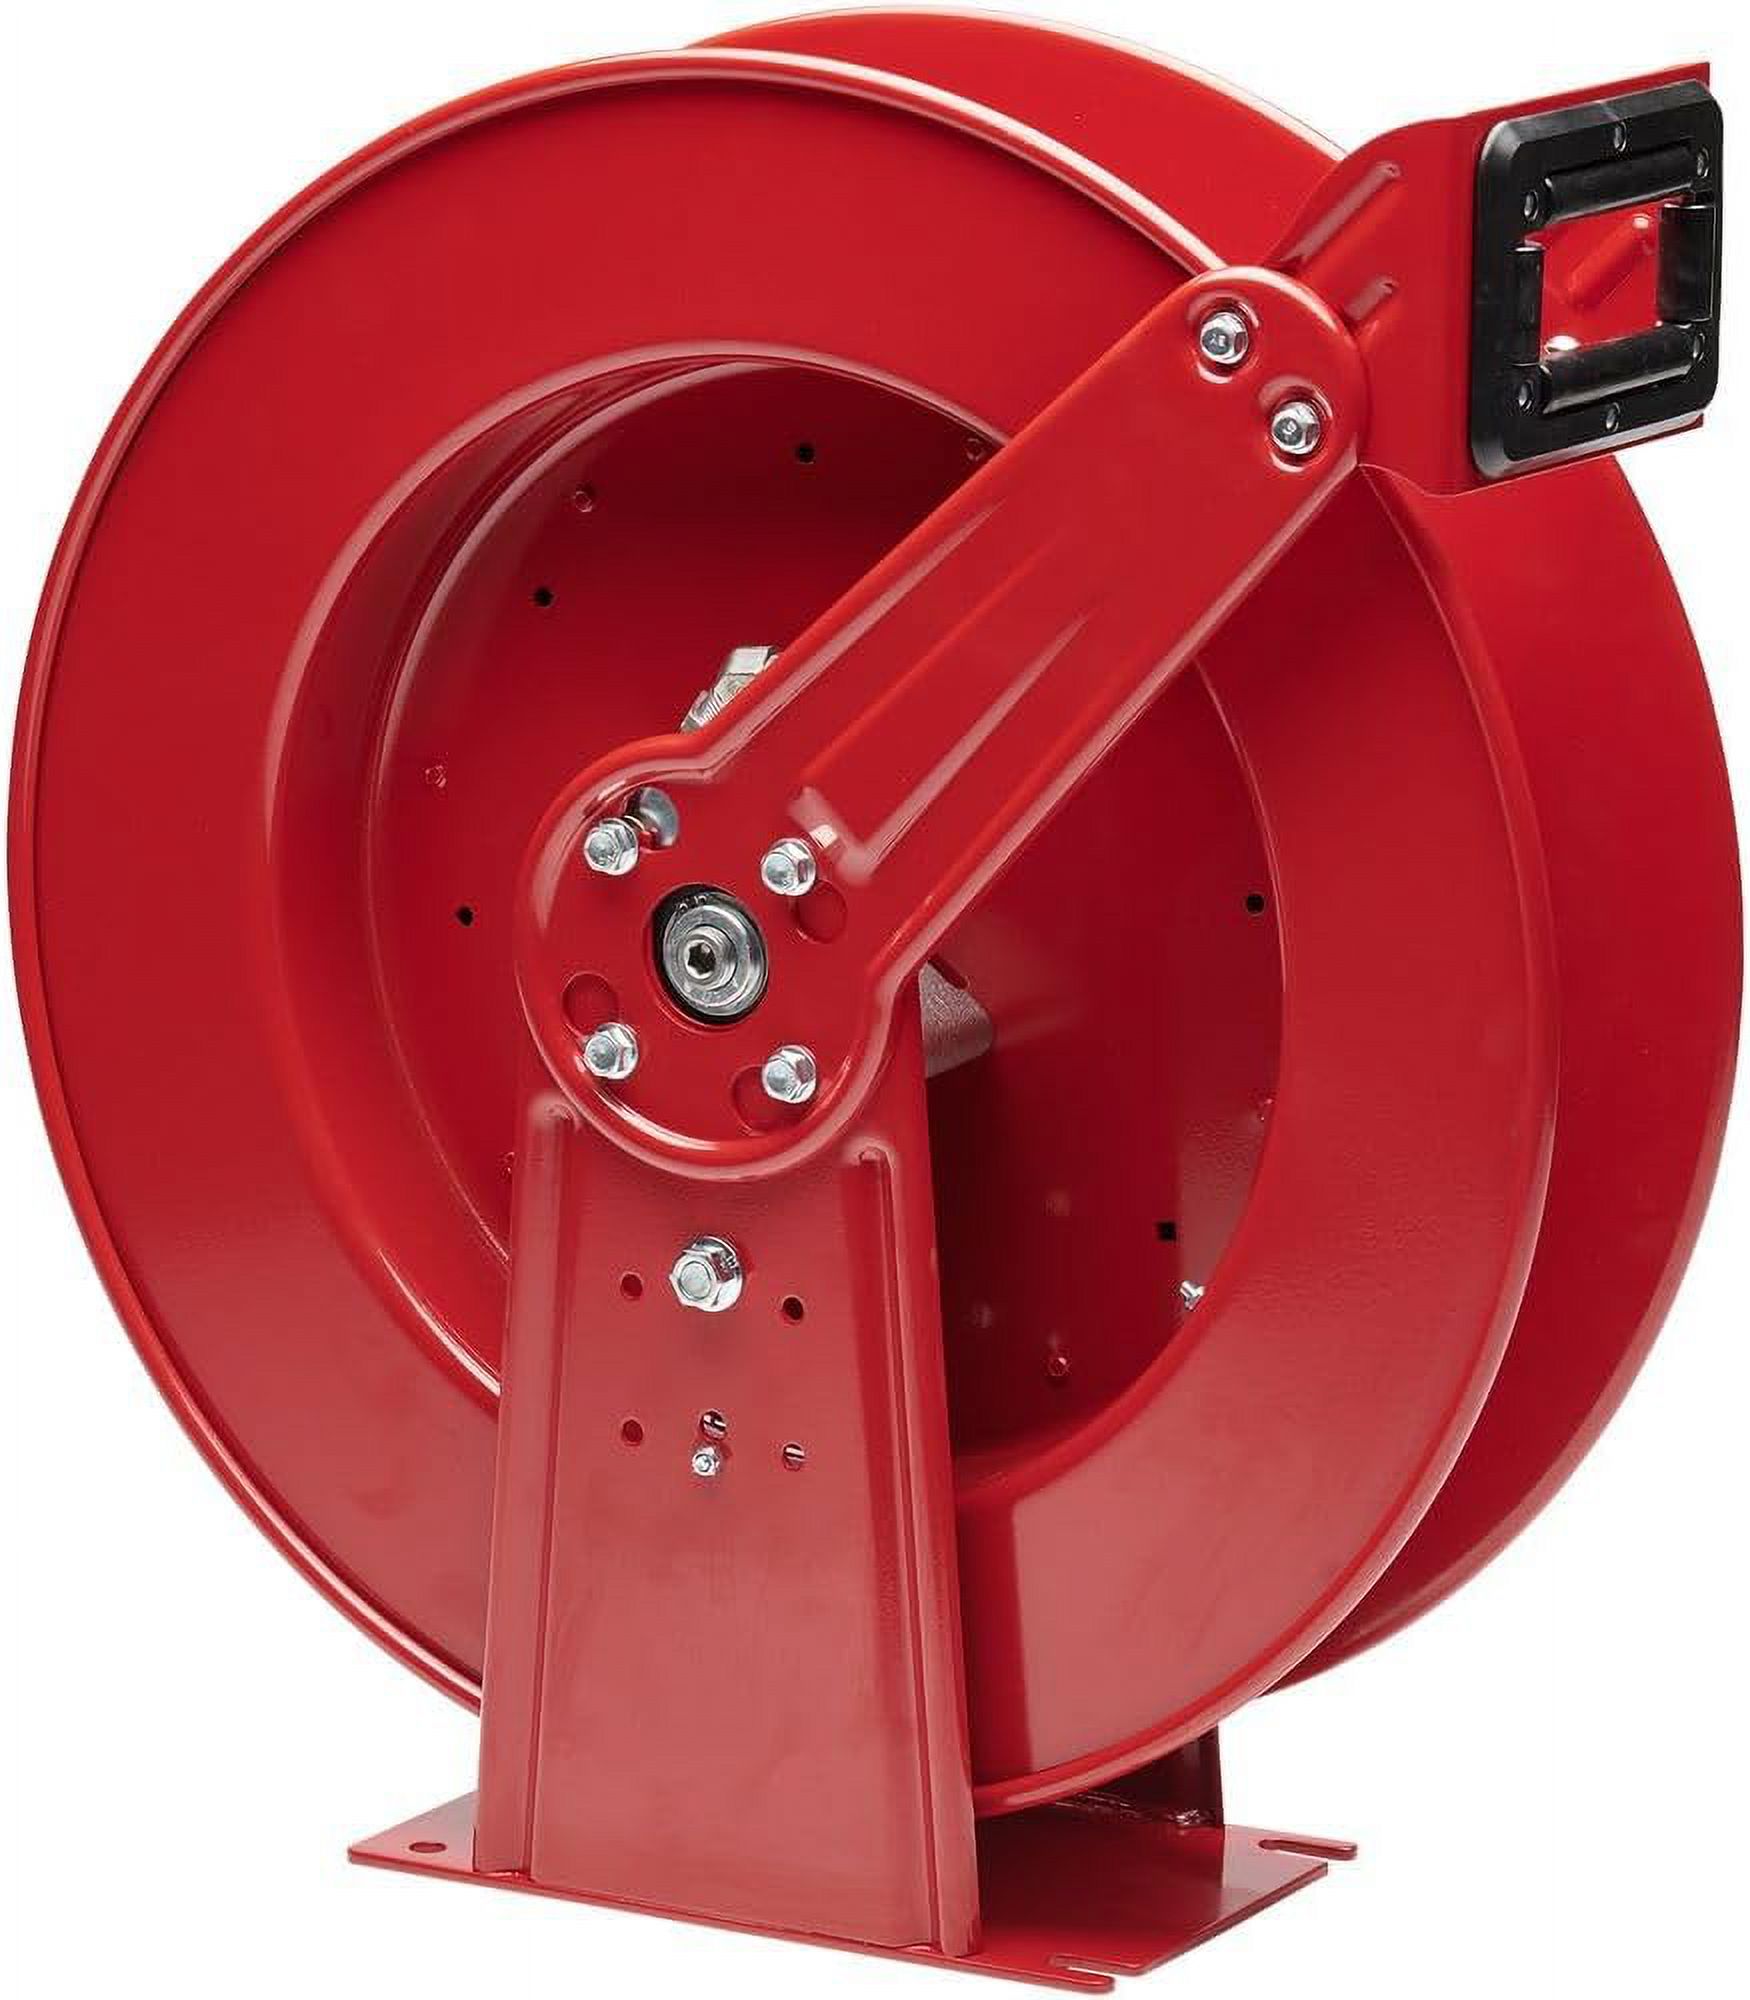 Reelcraft-PW81000 OHP 3/8 In. x 100 Ft. Spring Retractable Pressure Wash Hose Reel Without Hose, Steel - image 3 of 3